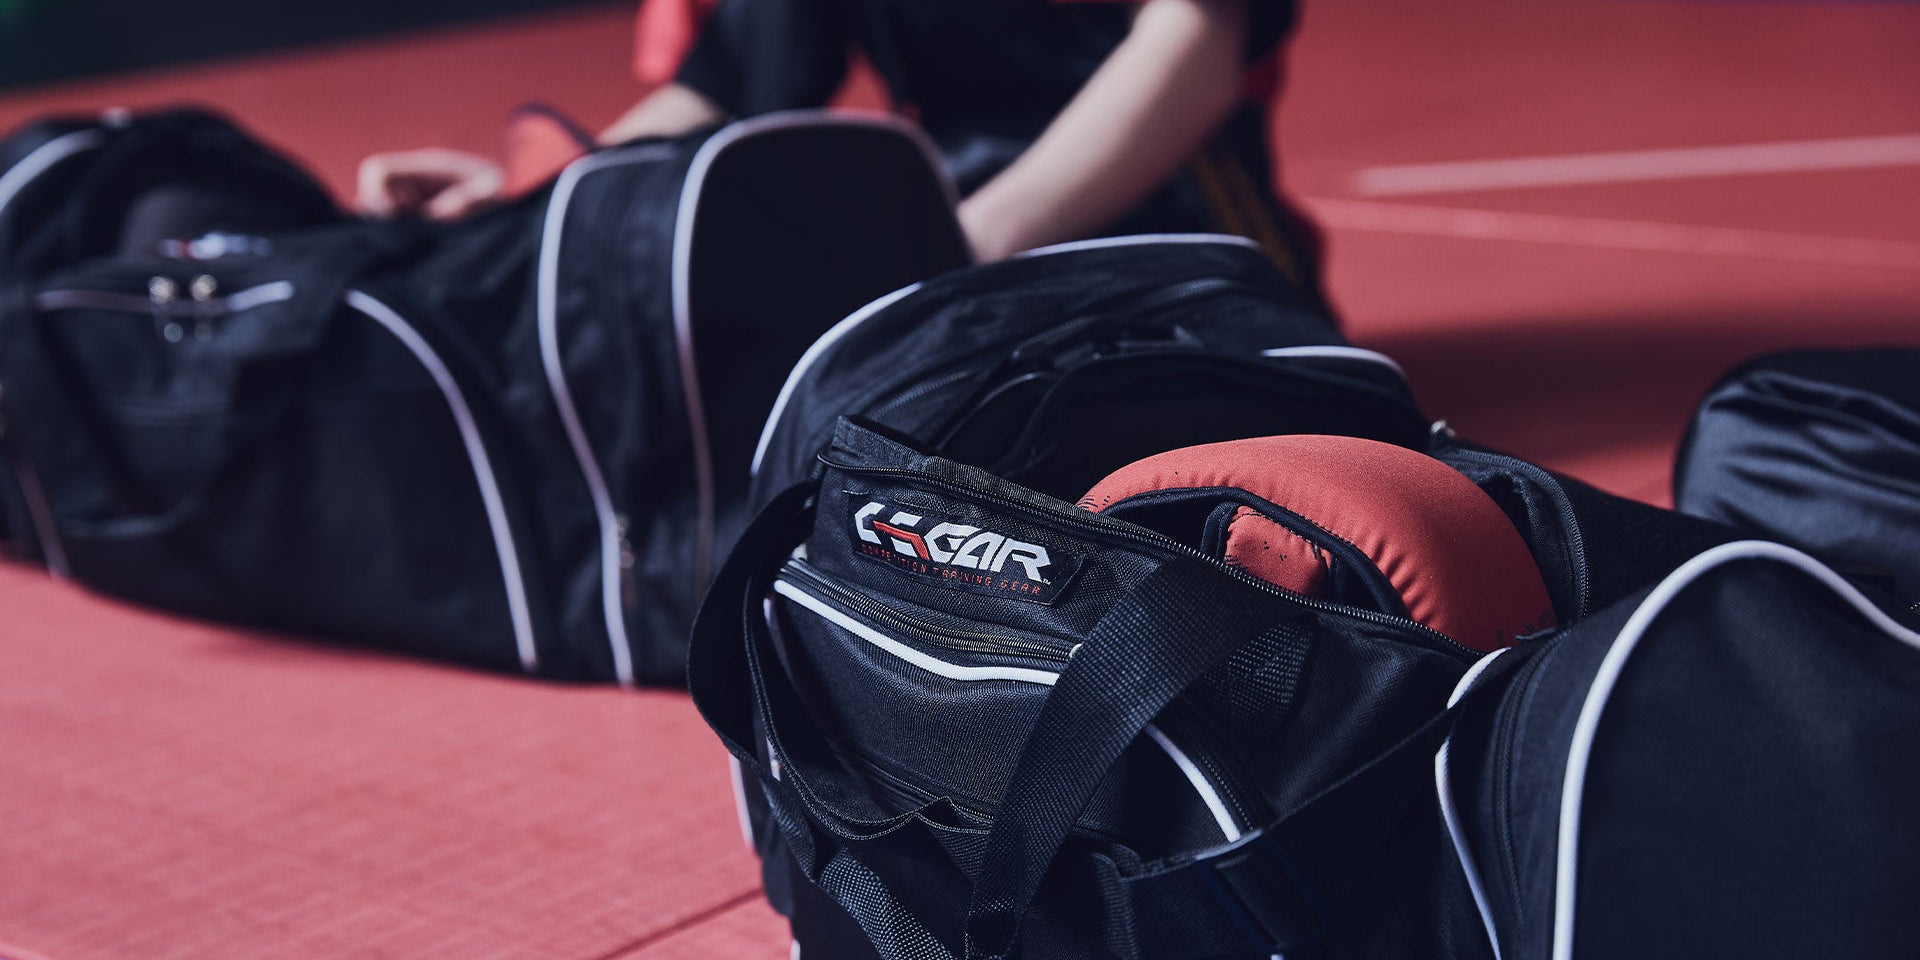 bags with training gear